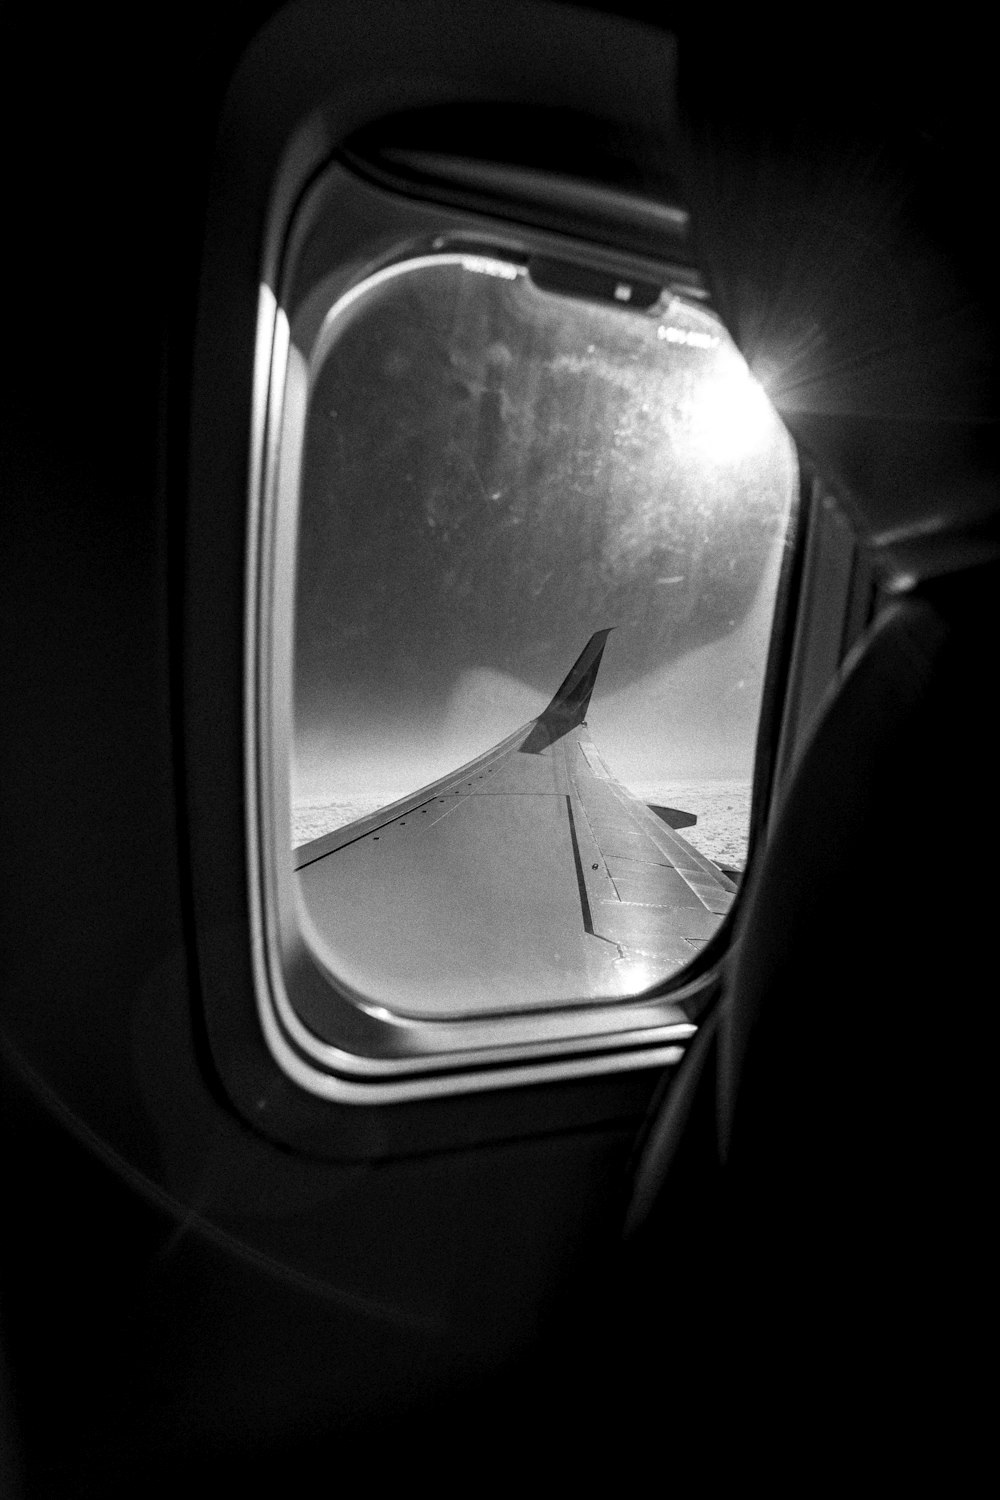 a view of the wing of an airplane through a window